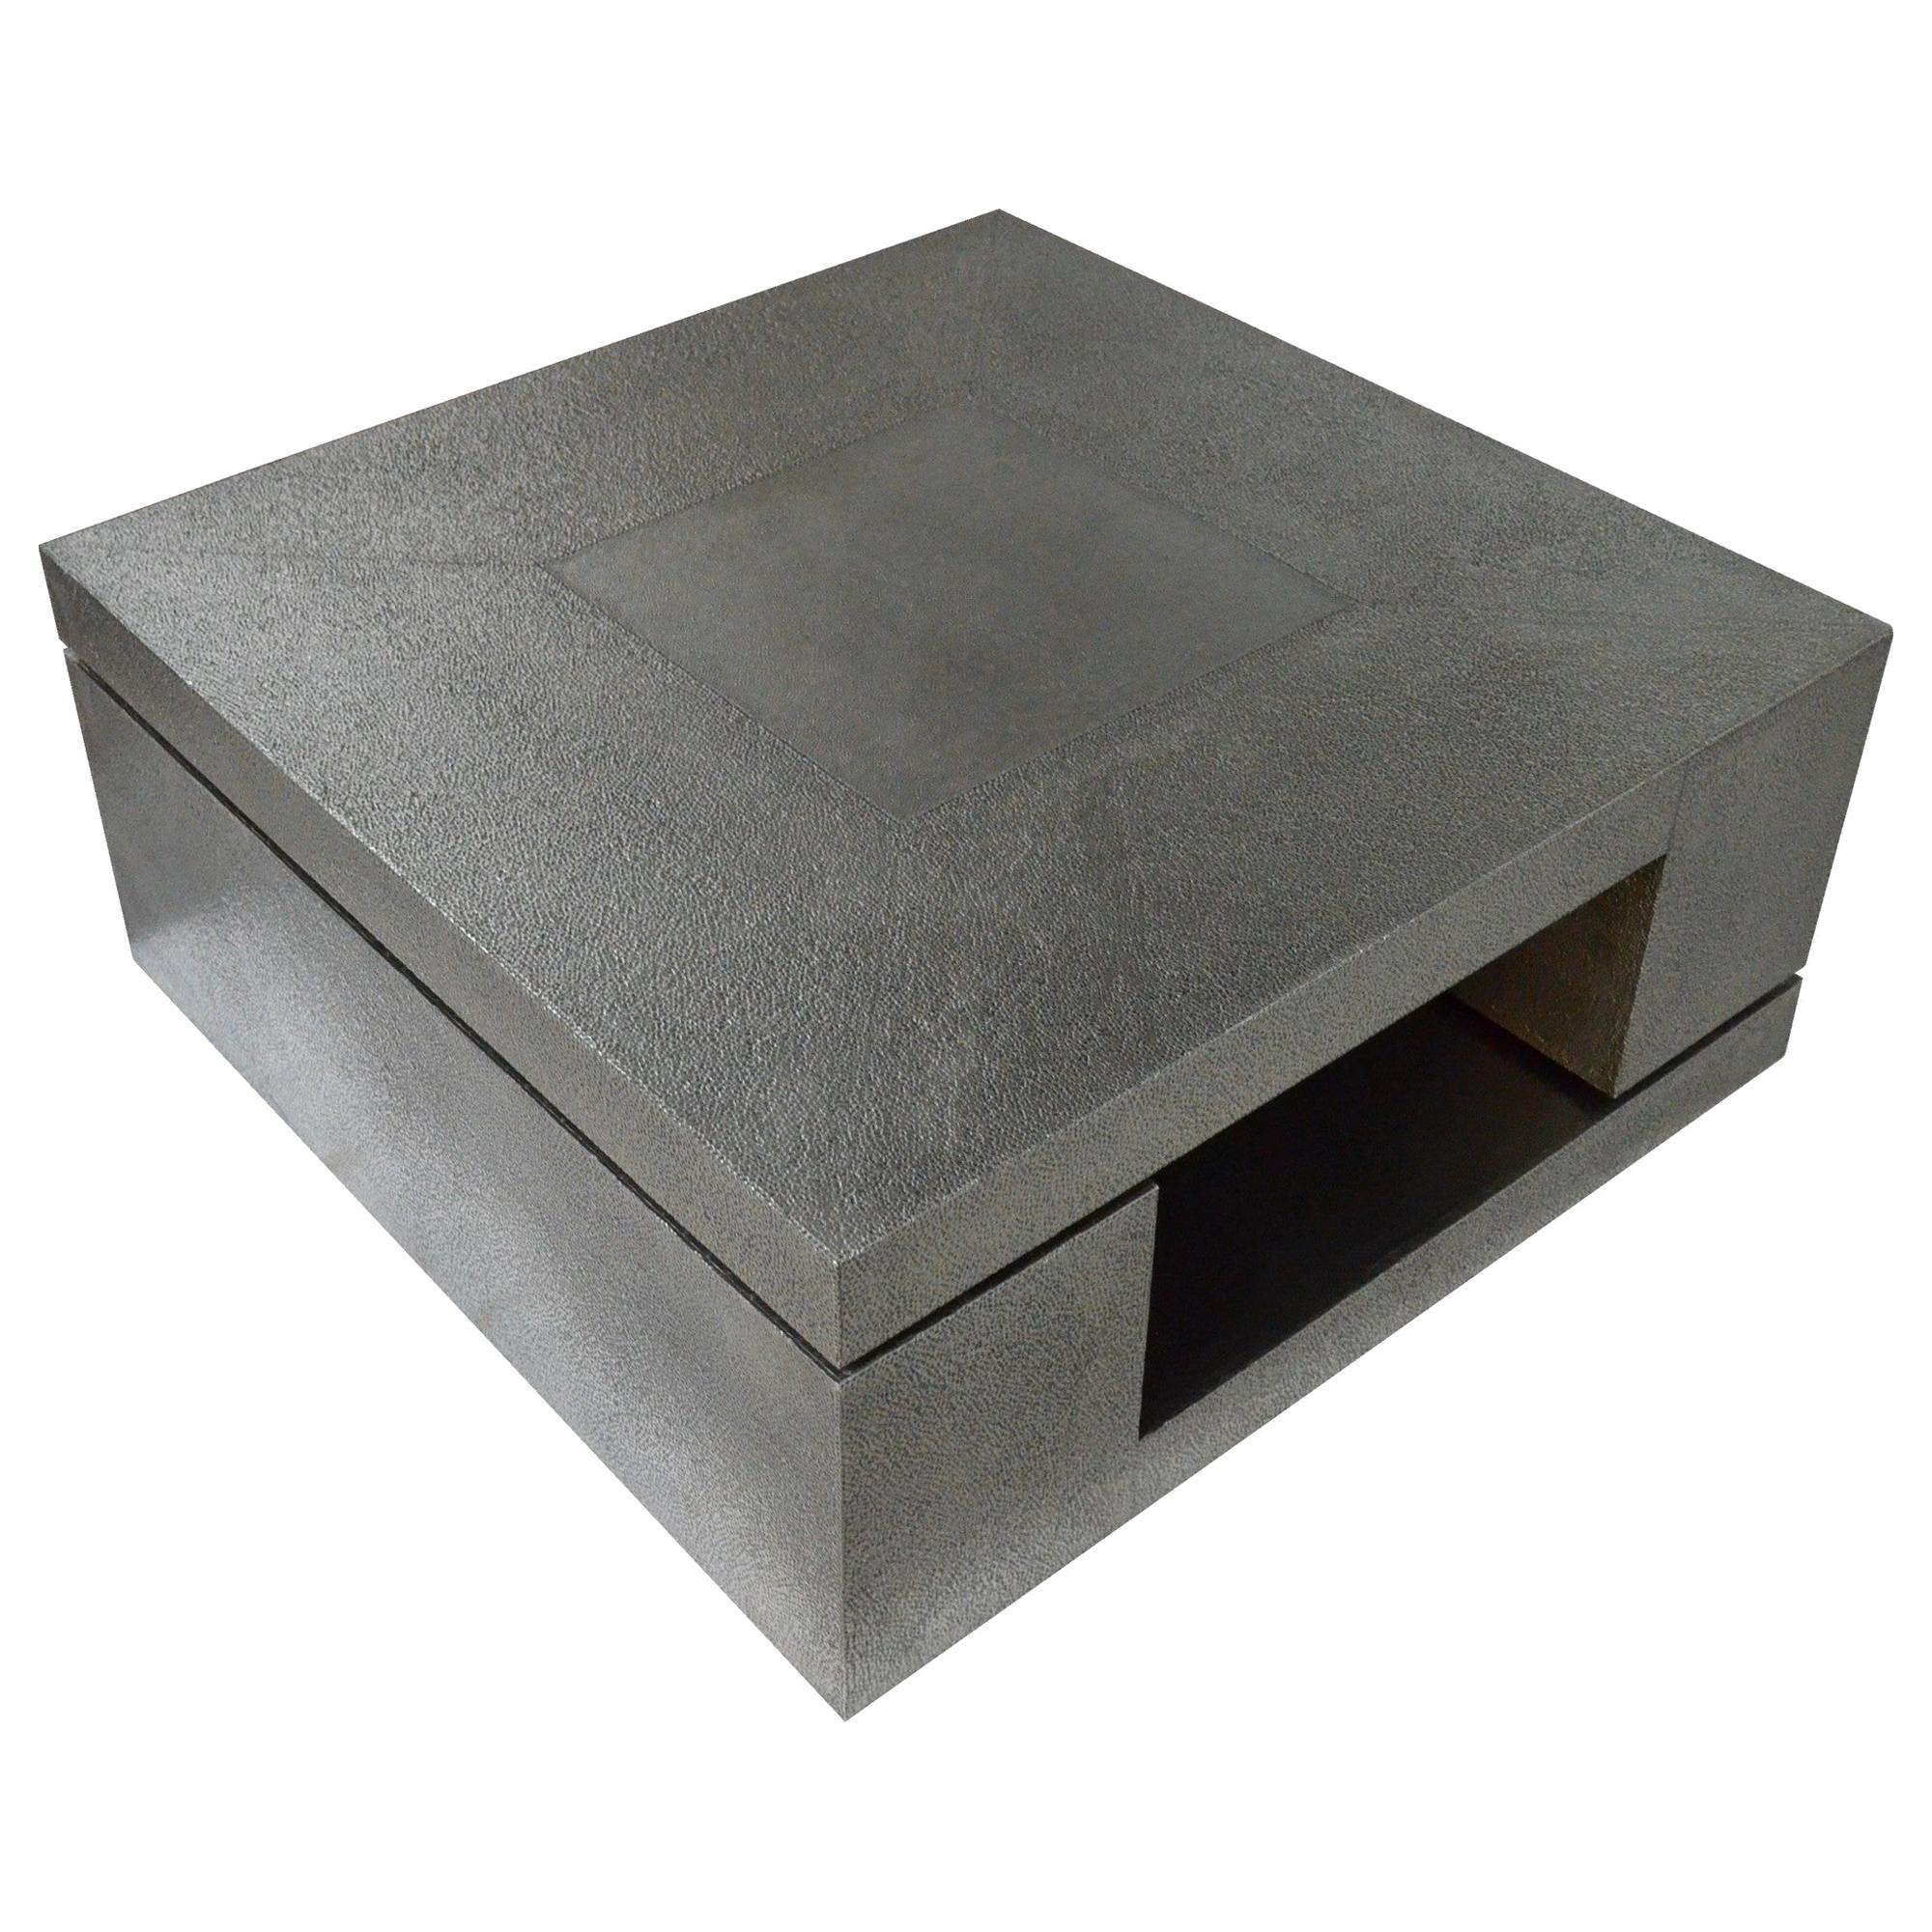 LX2 Table in Antiqued White Bronze Clad Over MDF by Stephanie Odegard For Sale